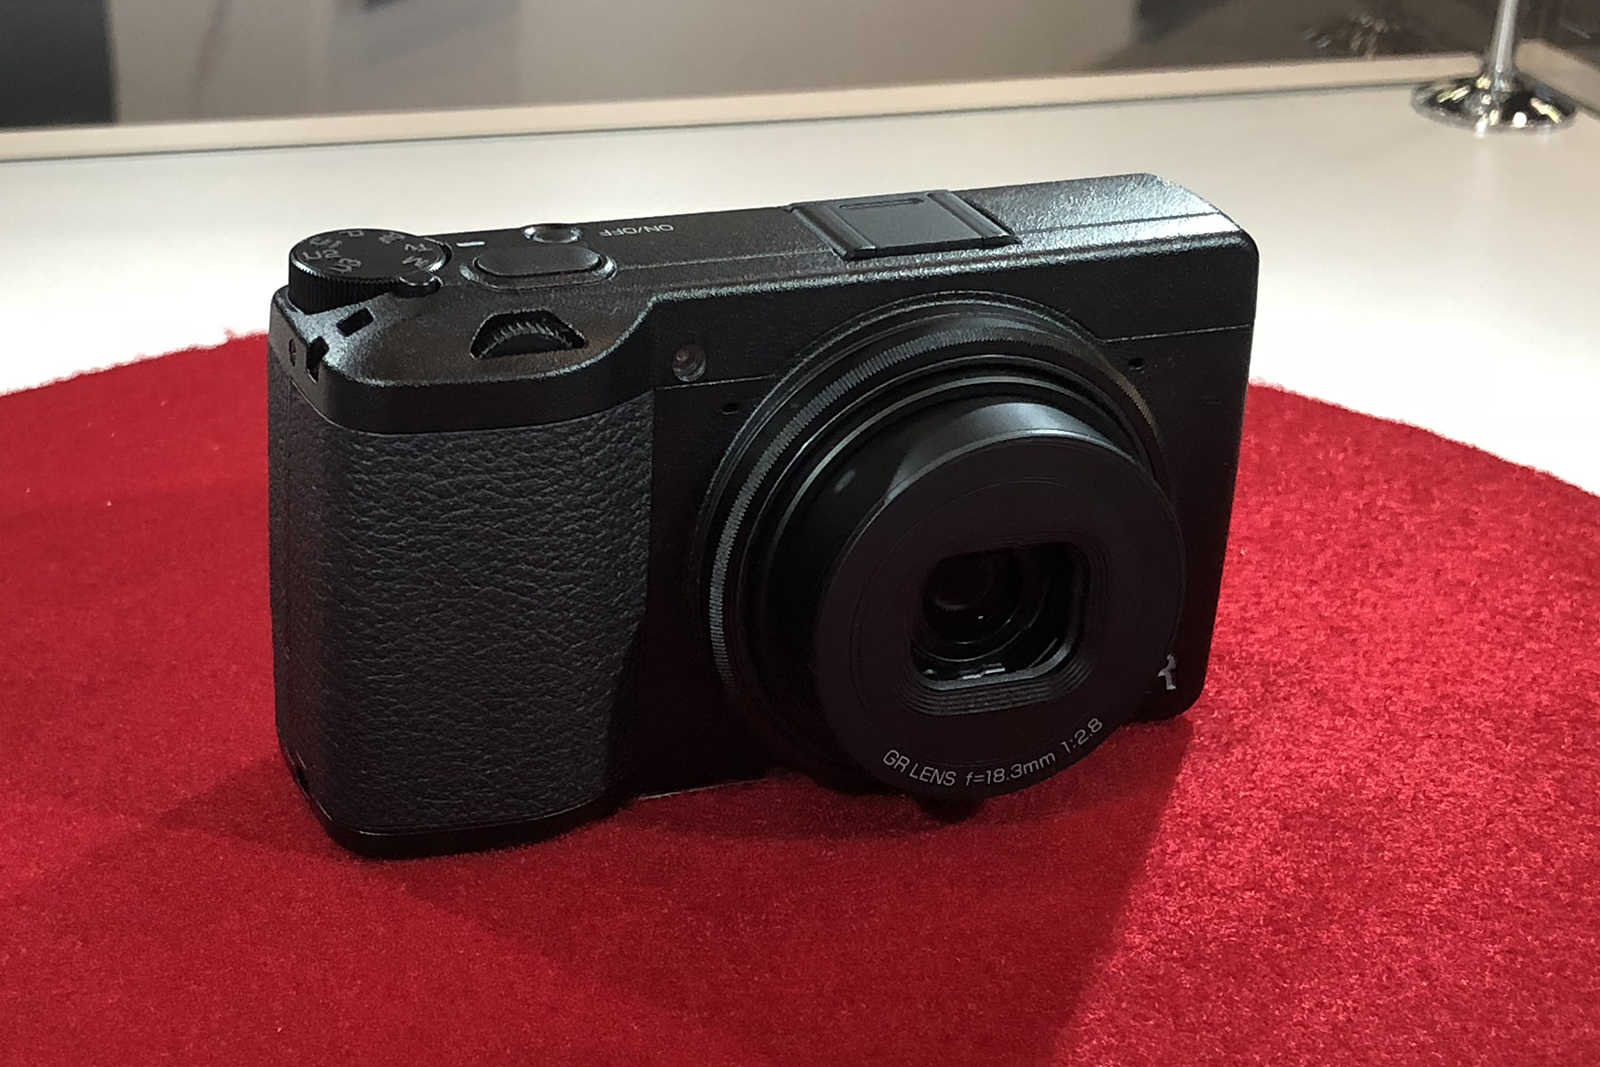 ricoh shows off upcoming gr iii advanced compact with 3 axis stabilization image 4